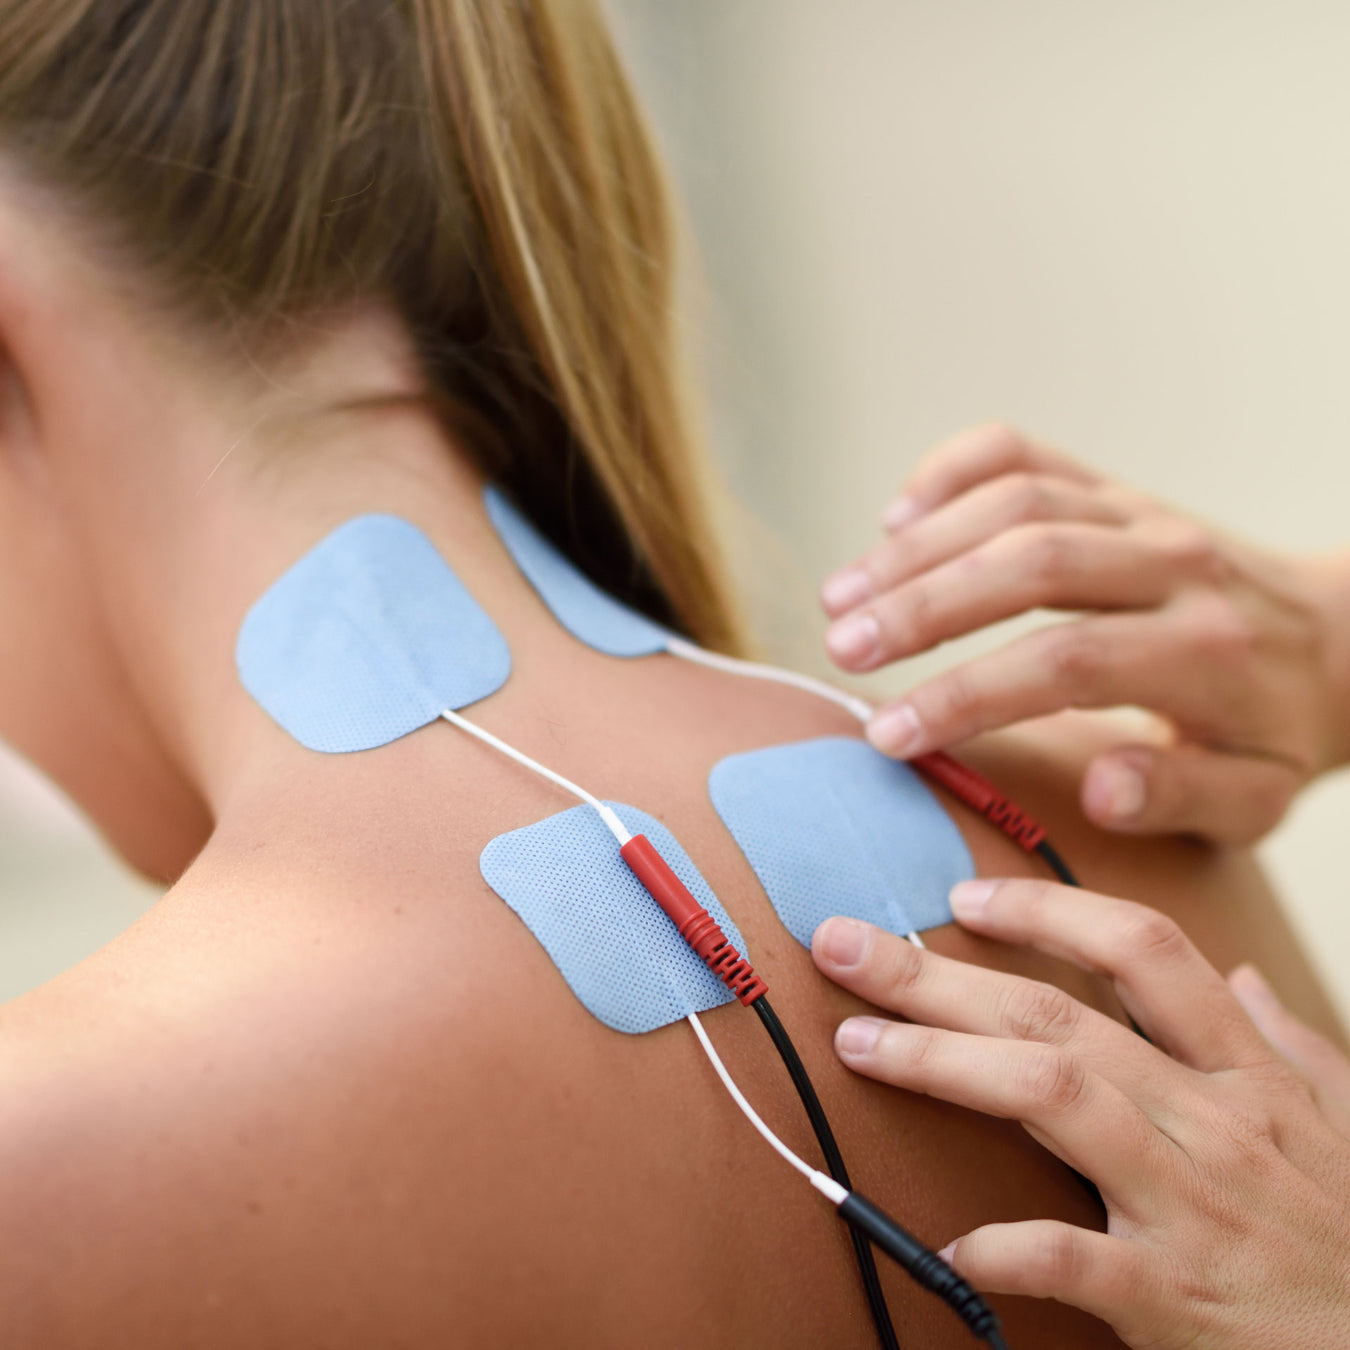 clinician applies electrodes to a woman patient's back for electrotherapy pain management